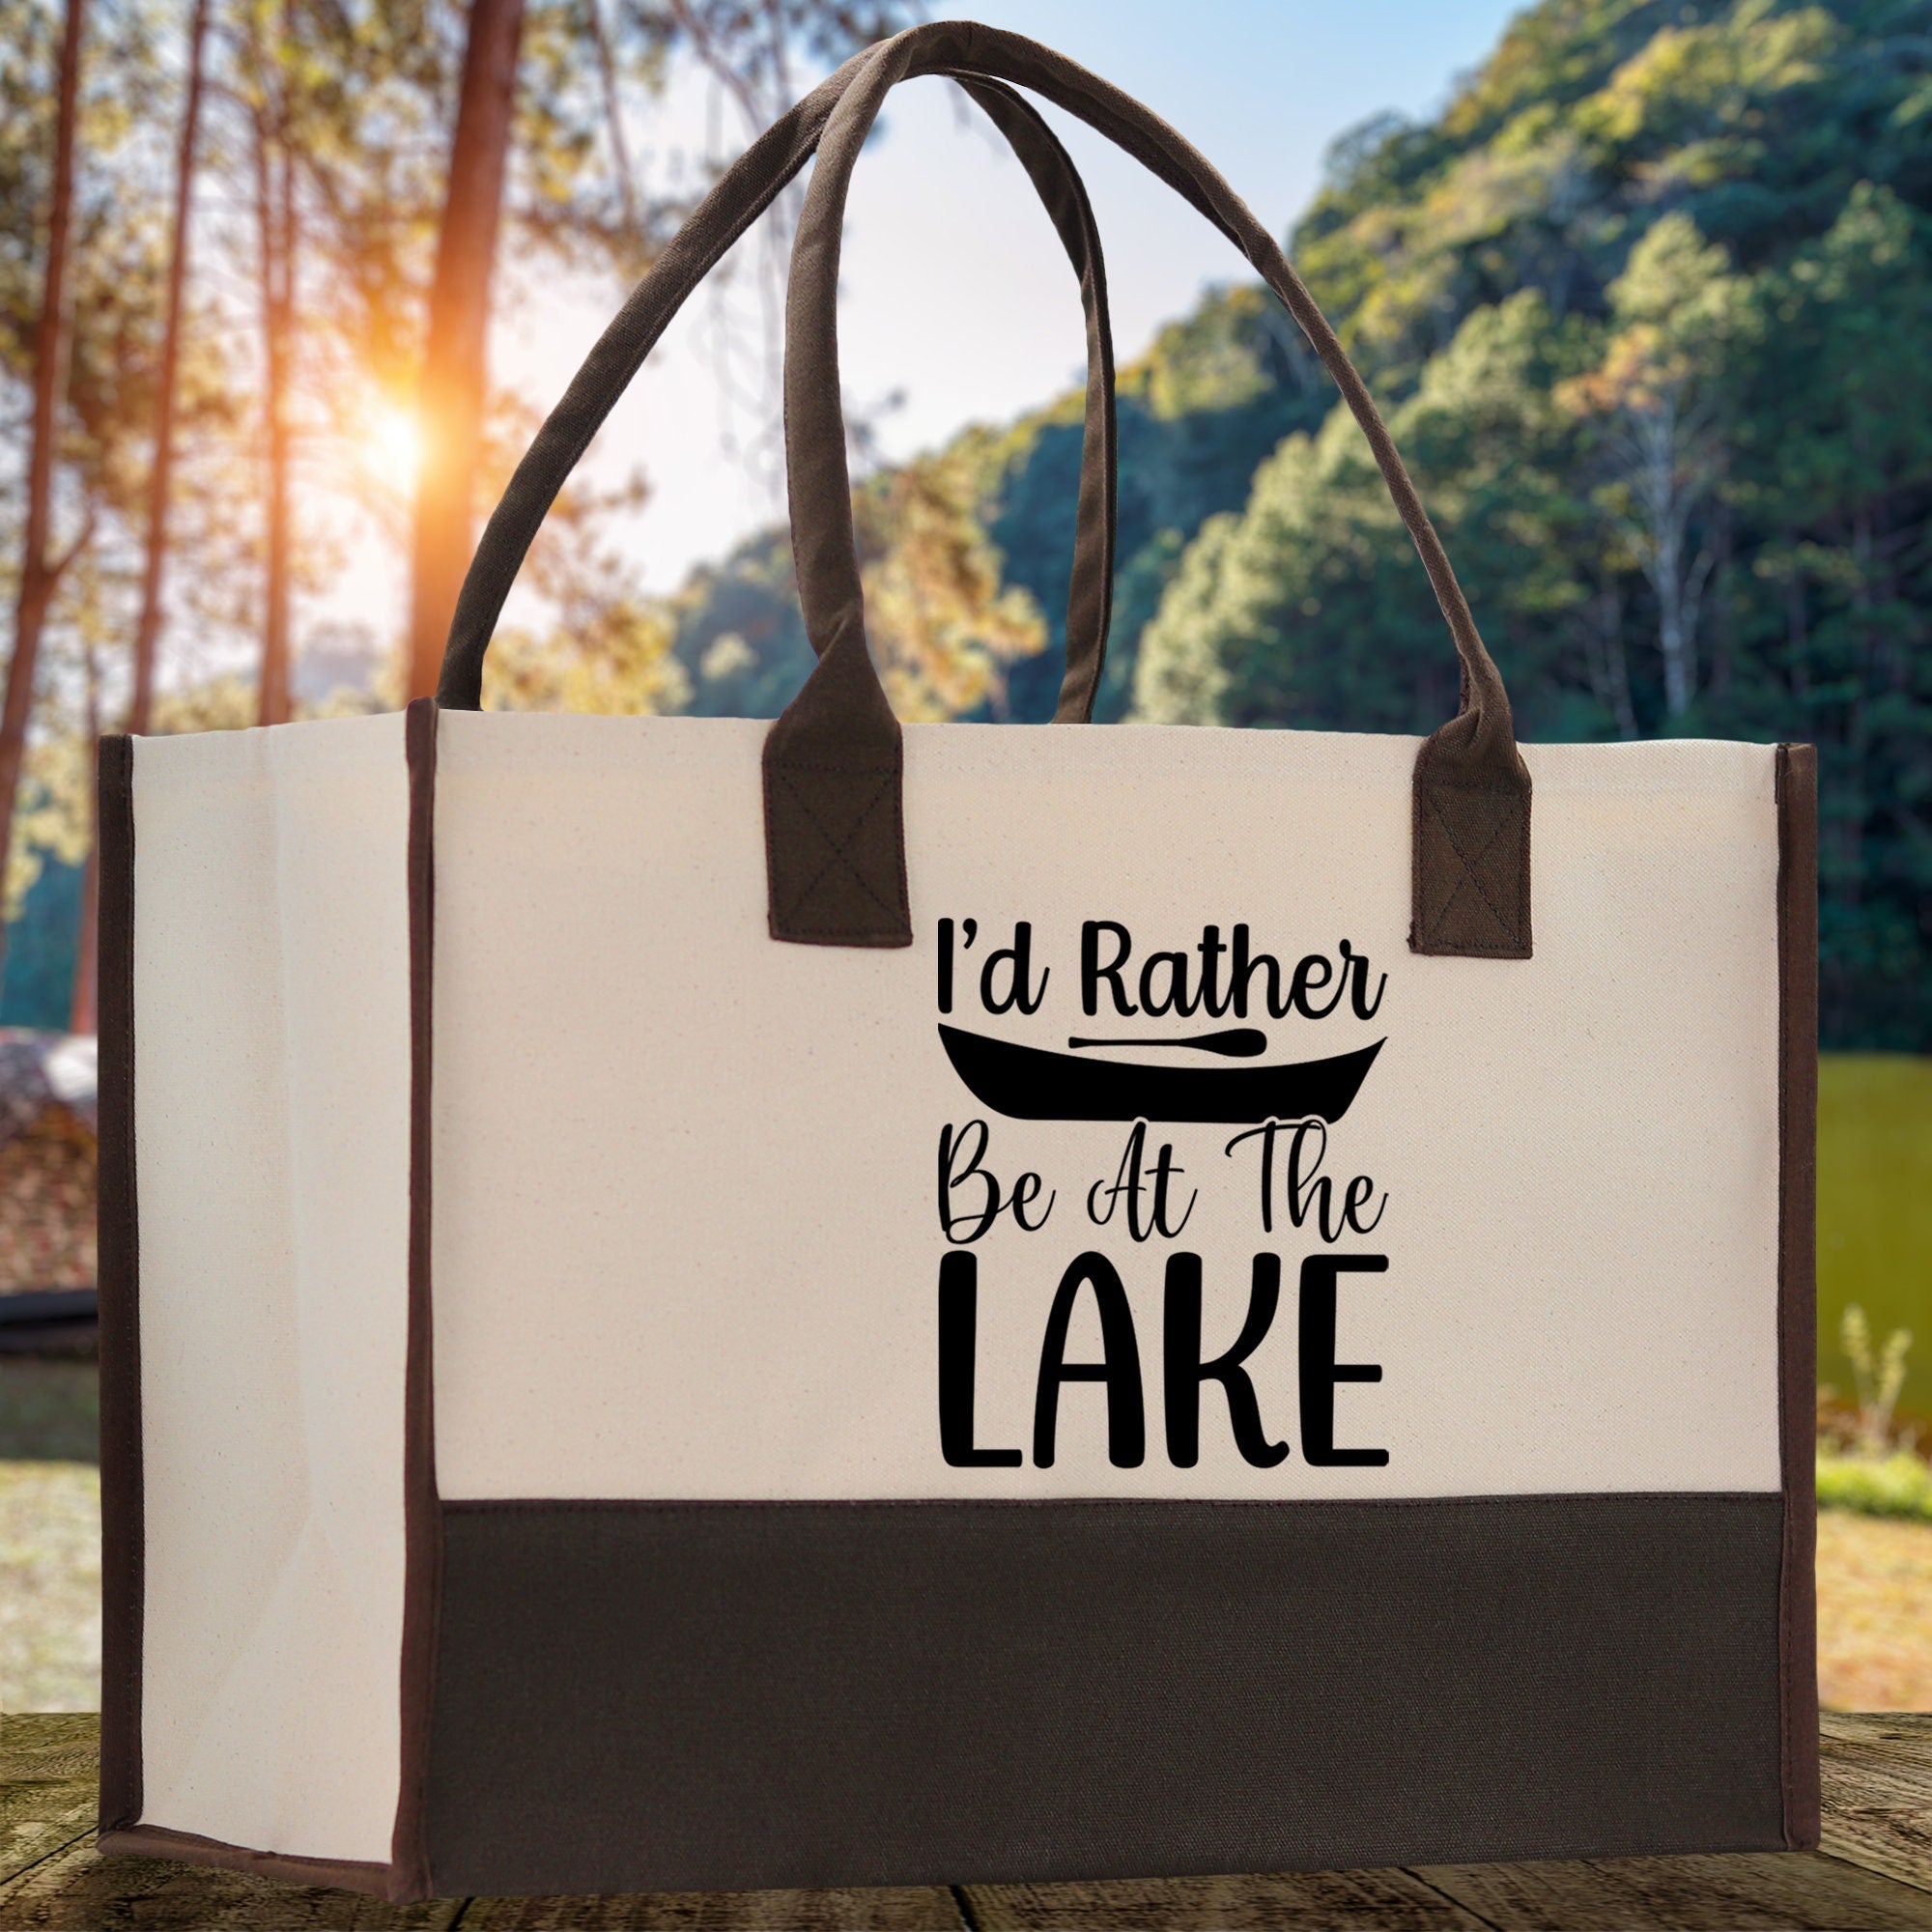 I'd Rather Be at the Lake Cotton Canvas Chic Tote Bag Camping Tote Lake Lover Gift Tote Bag Outdoor Tote Weekender Tote Laker Tote